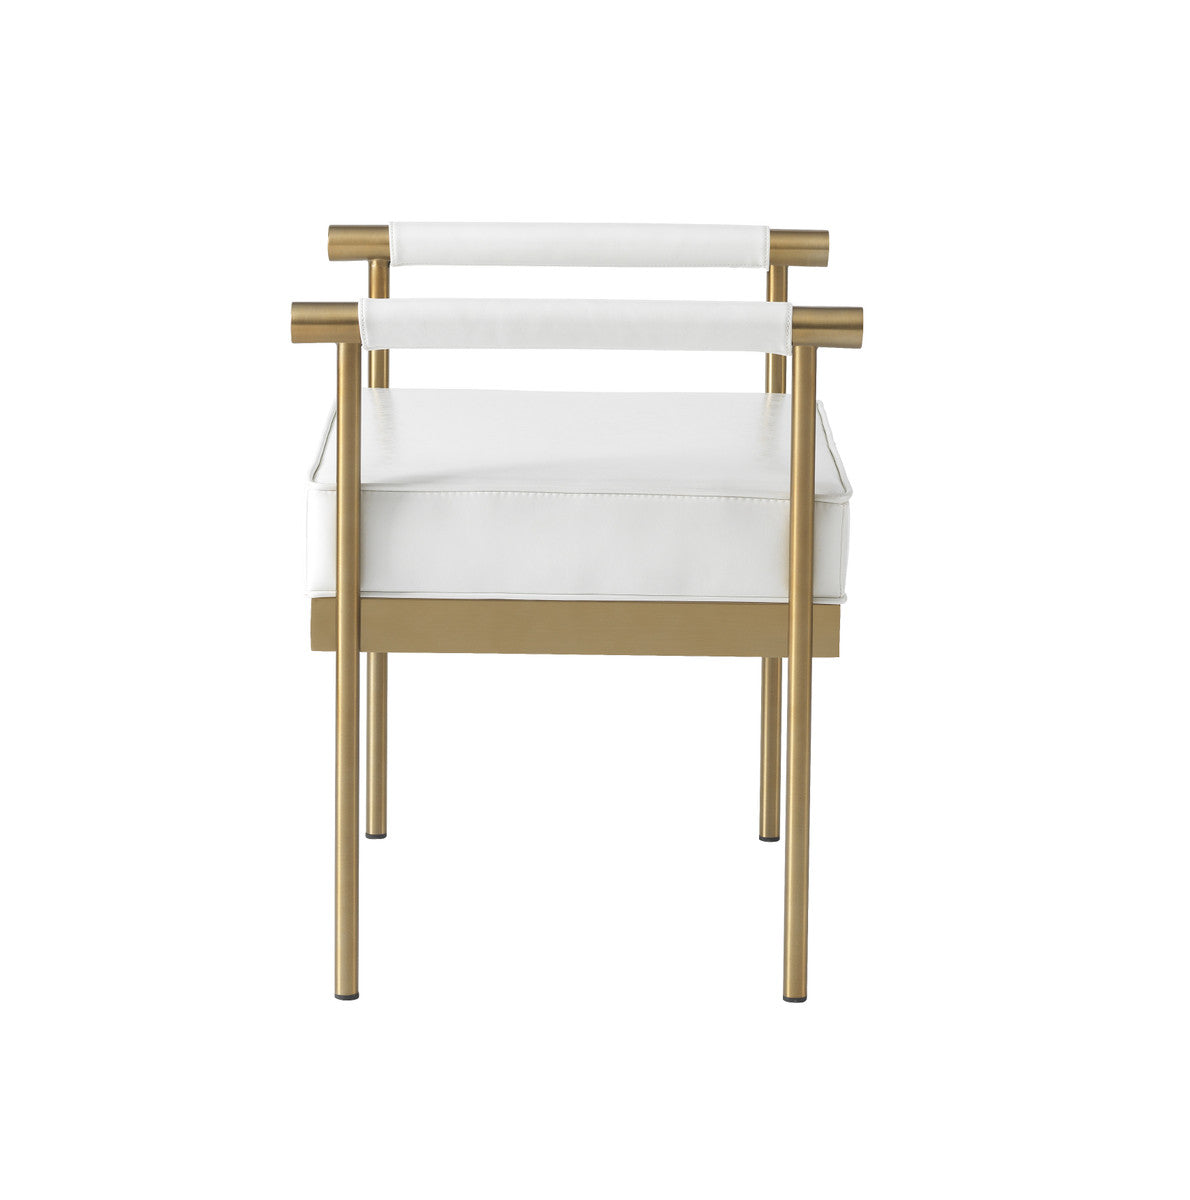 Malakeh White Vegan Leather Bench - Luxury Living Collection